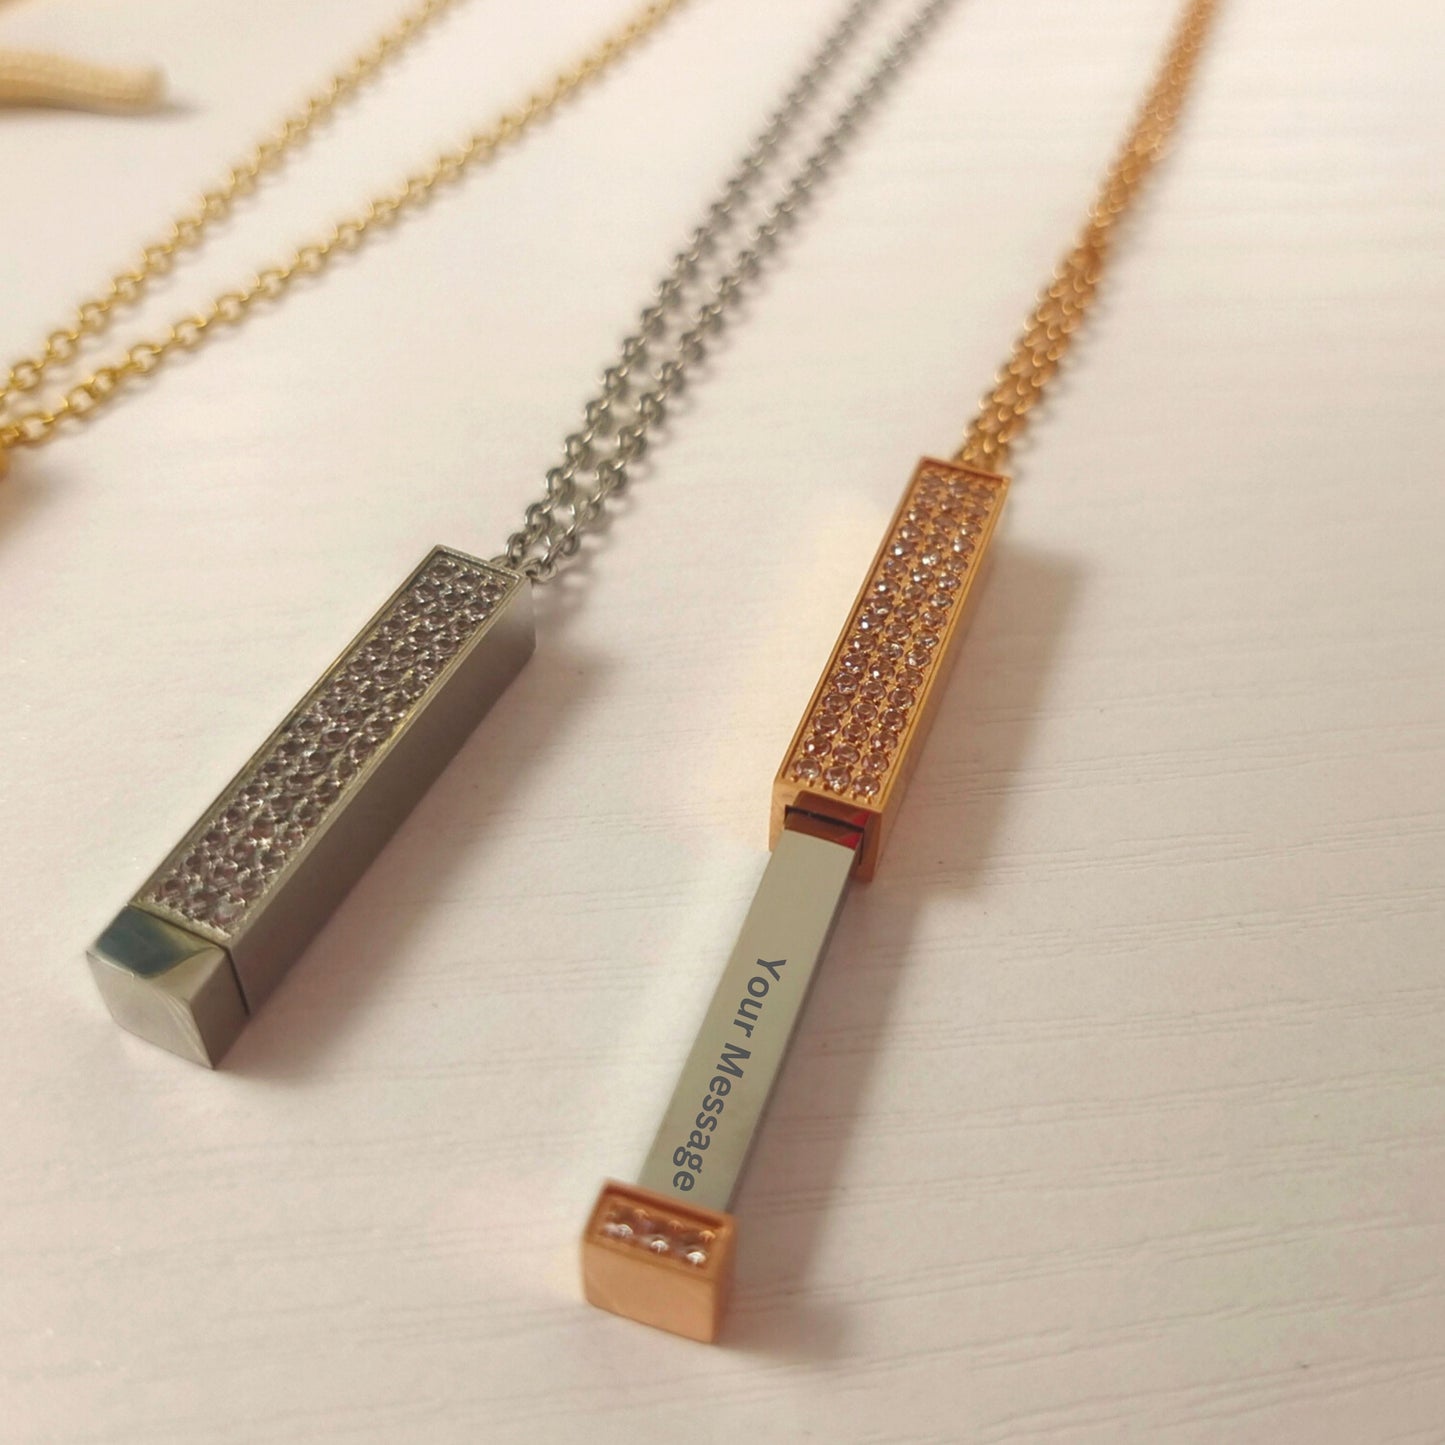 Customizable BDSM necklaces in gold and silver for DDLG lifestyle